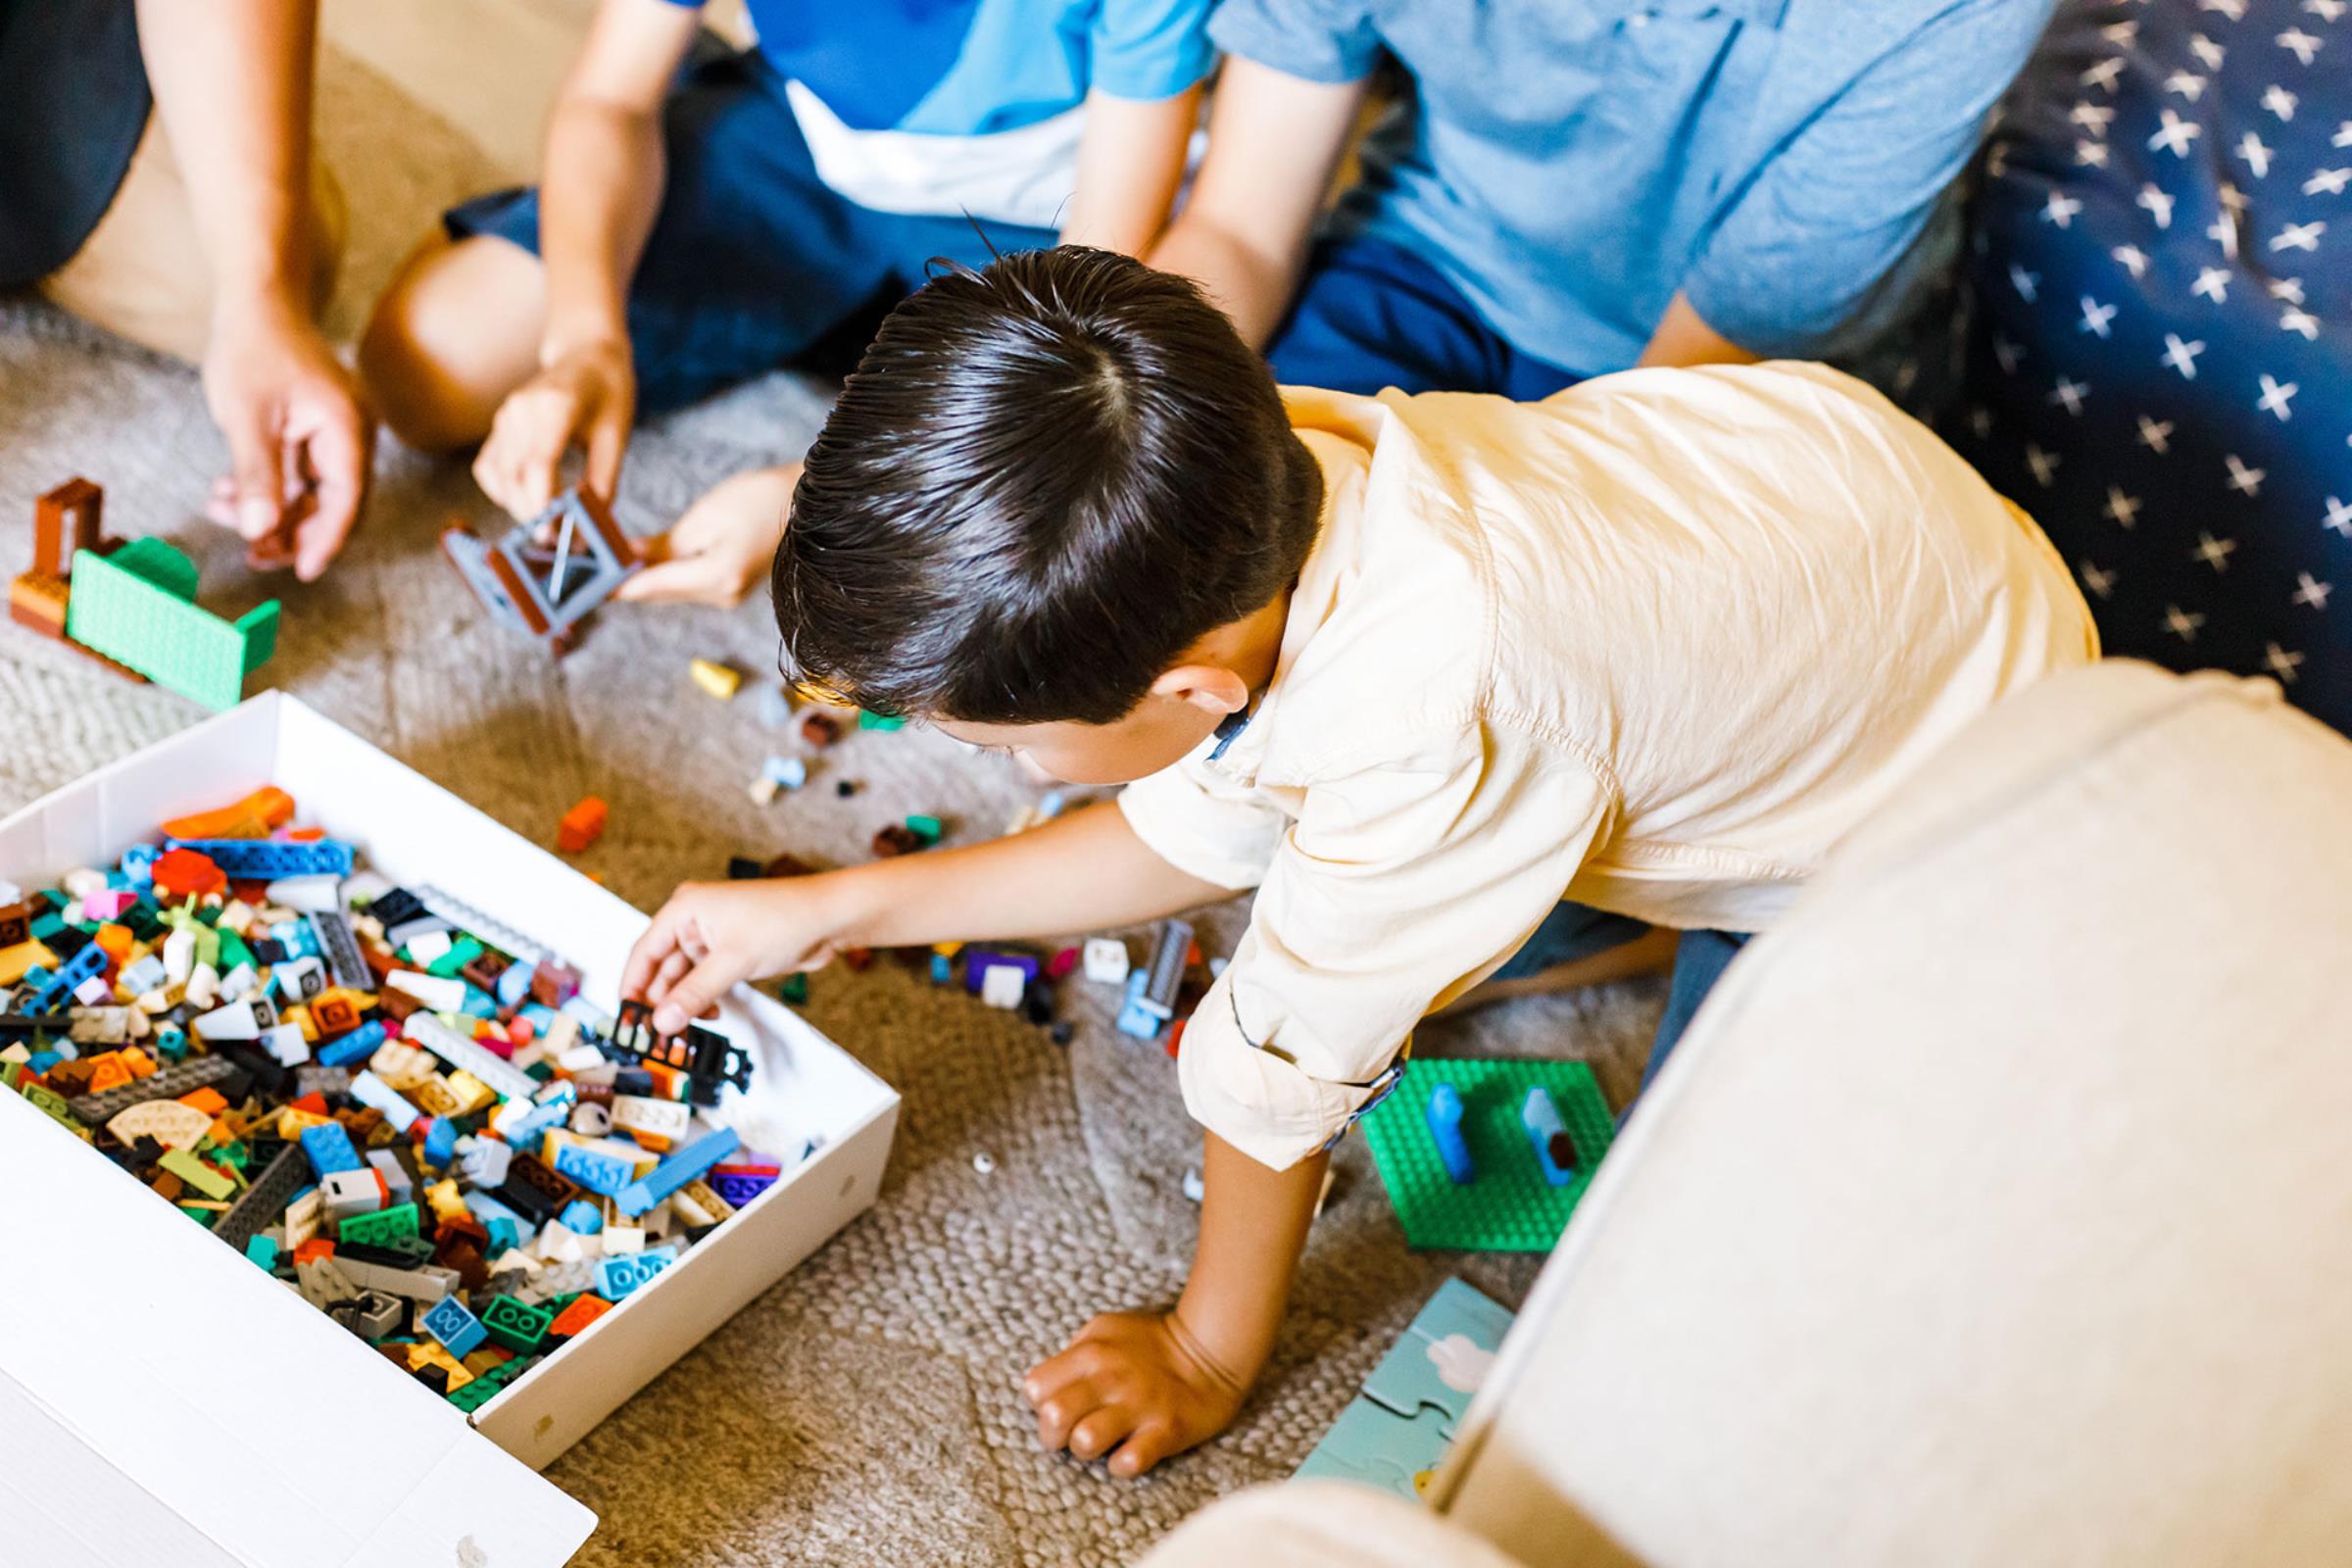 Male child playing with Legos on the floor